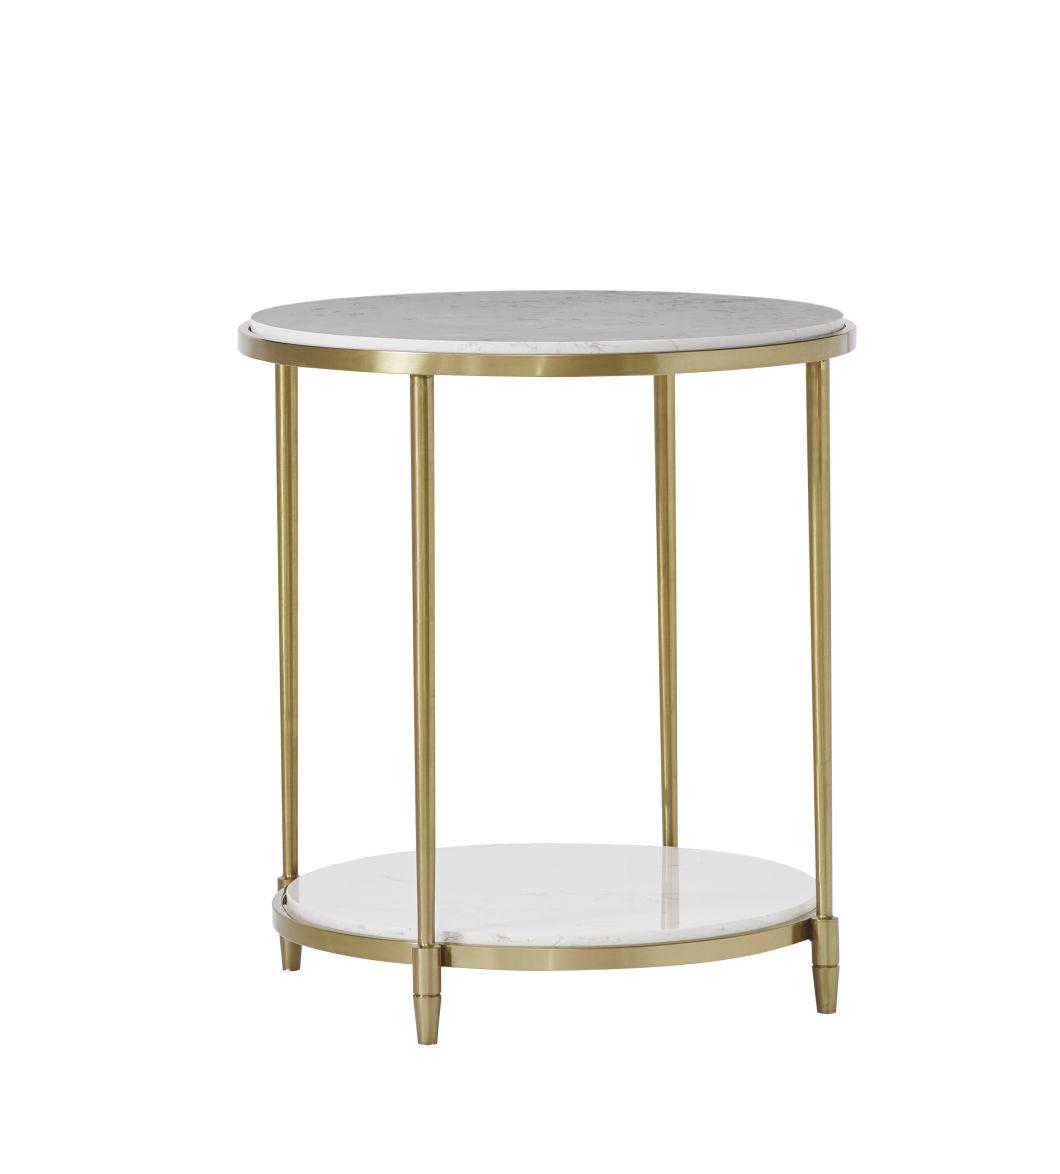 Glass Top High Quality Living Room Side Table